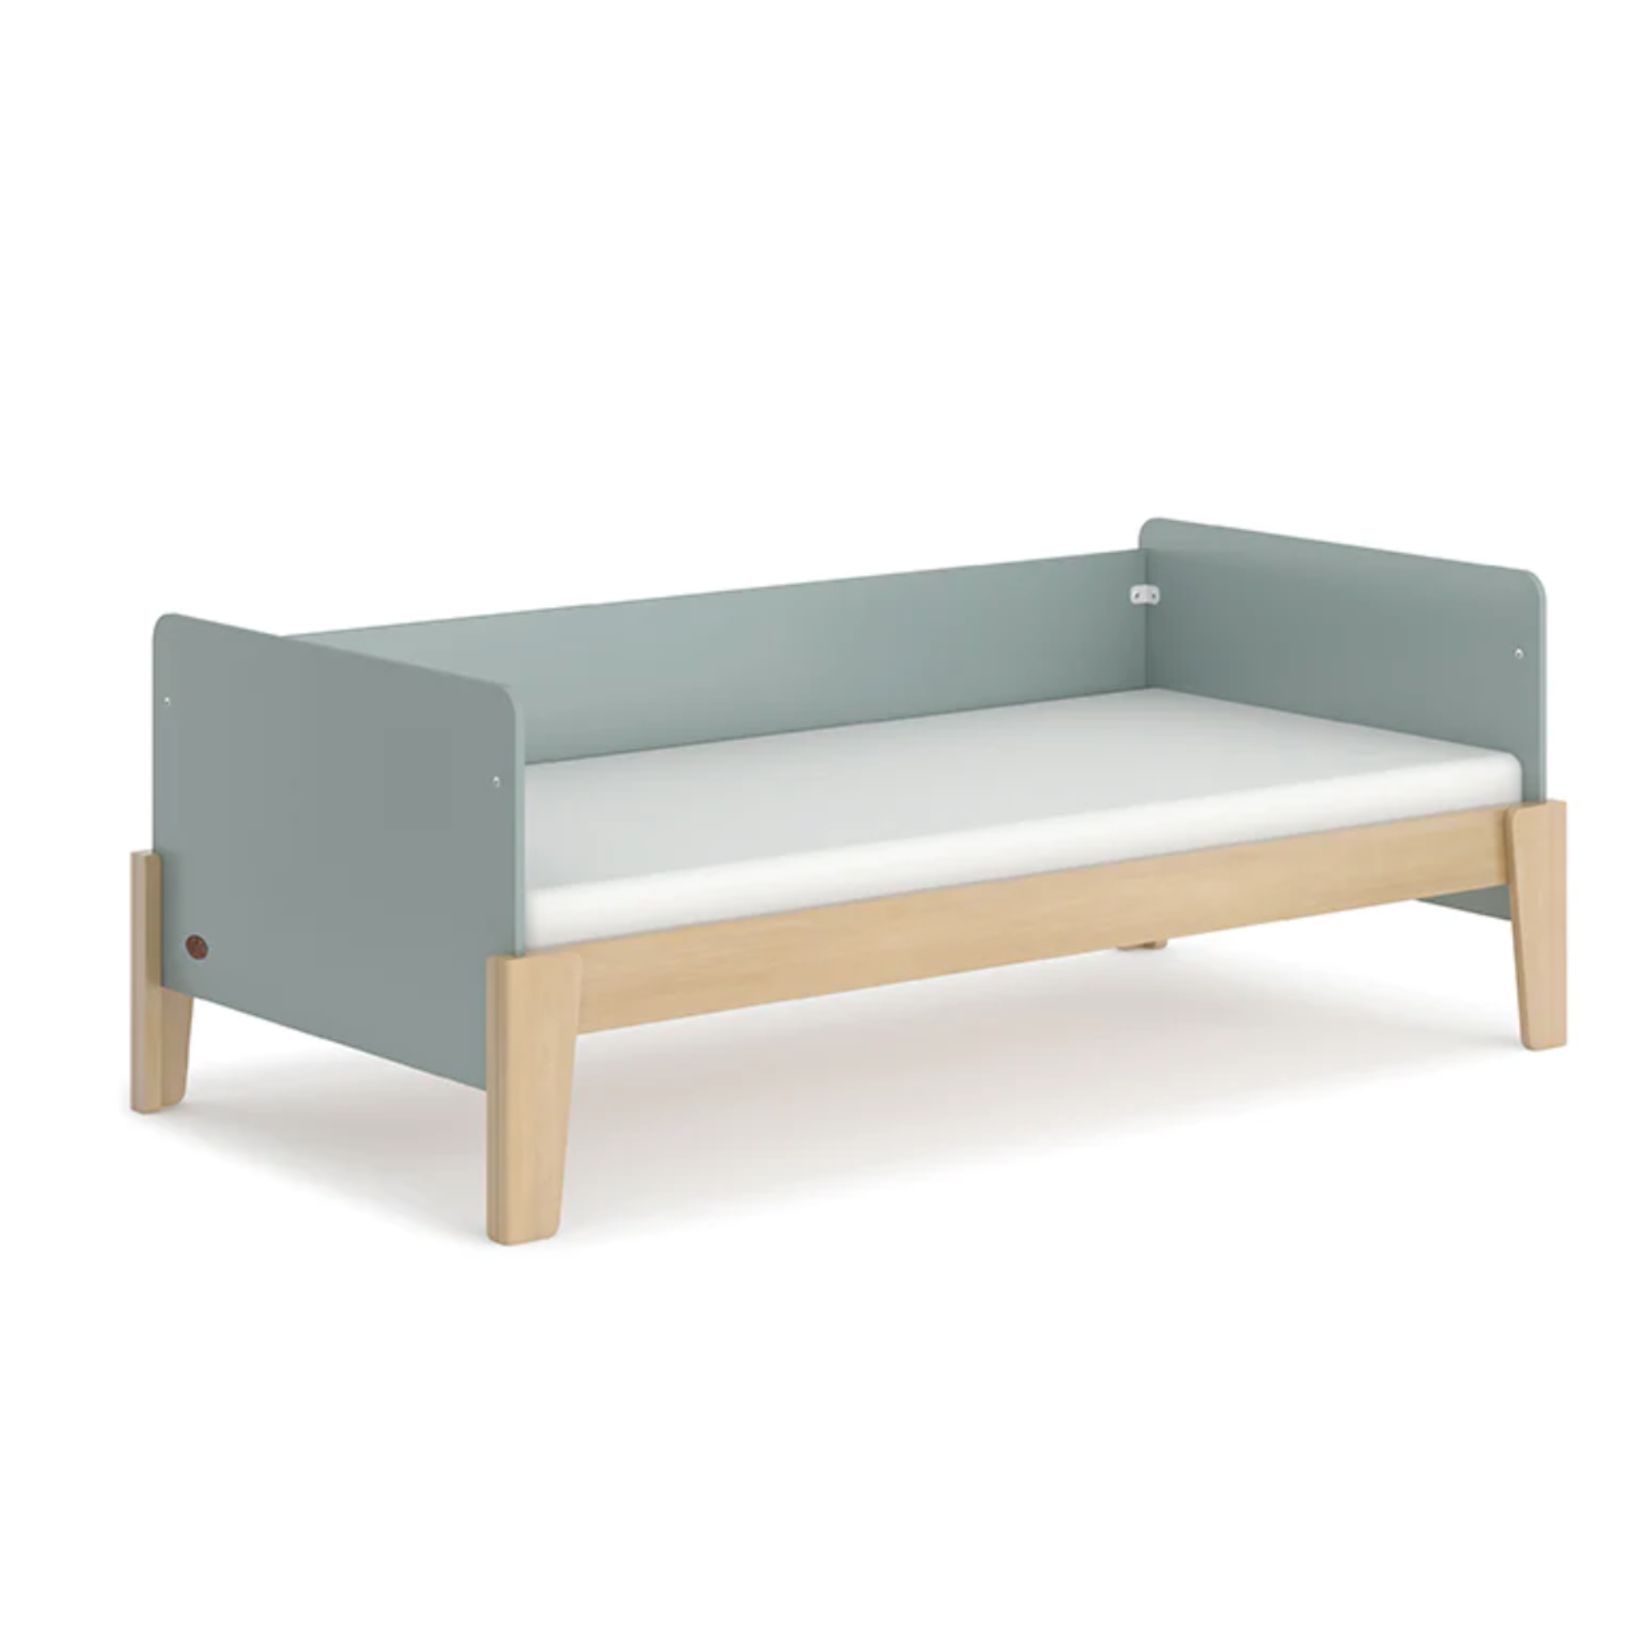 Boori Natty Guarded single bed-BLUEBERRY AND ALMOND